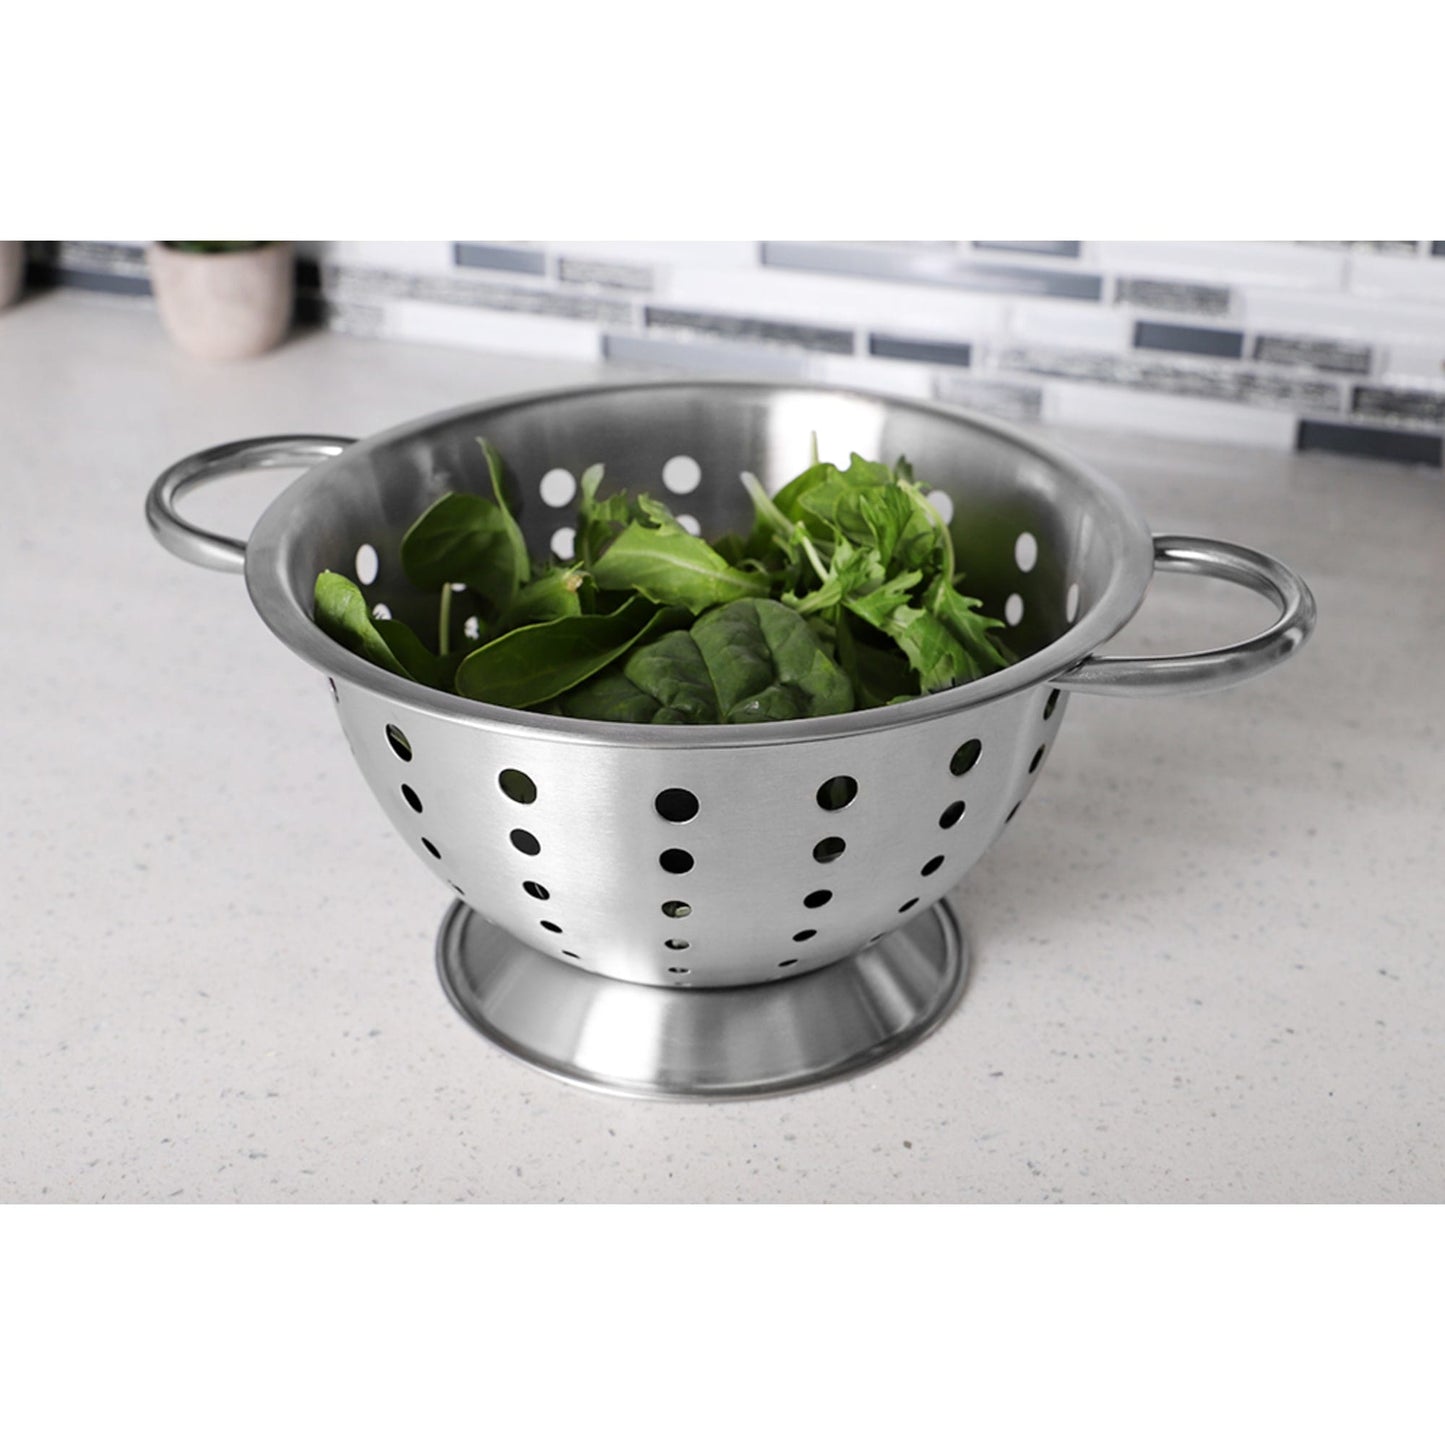 3 Qt Deep Stainless Steel Colander with Easy Grip Handles, Silver